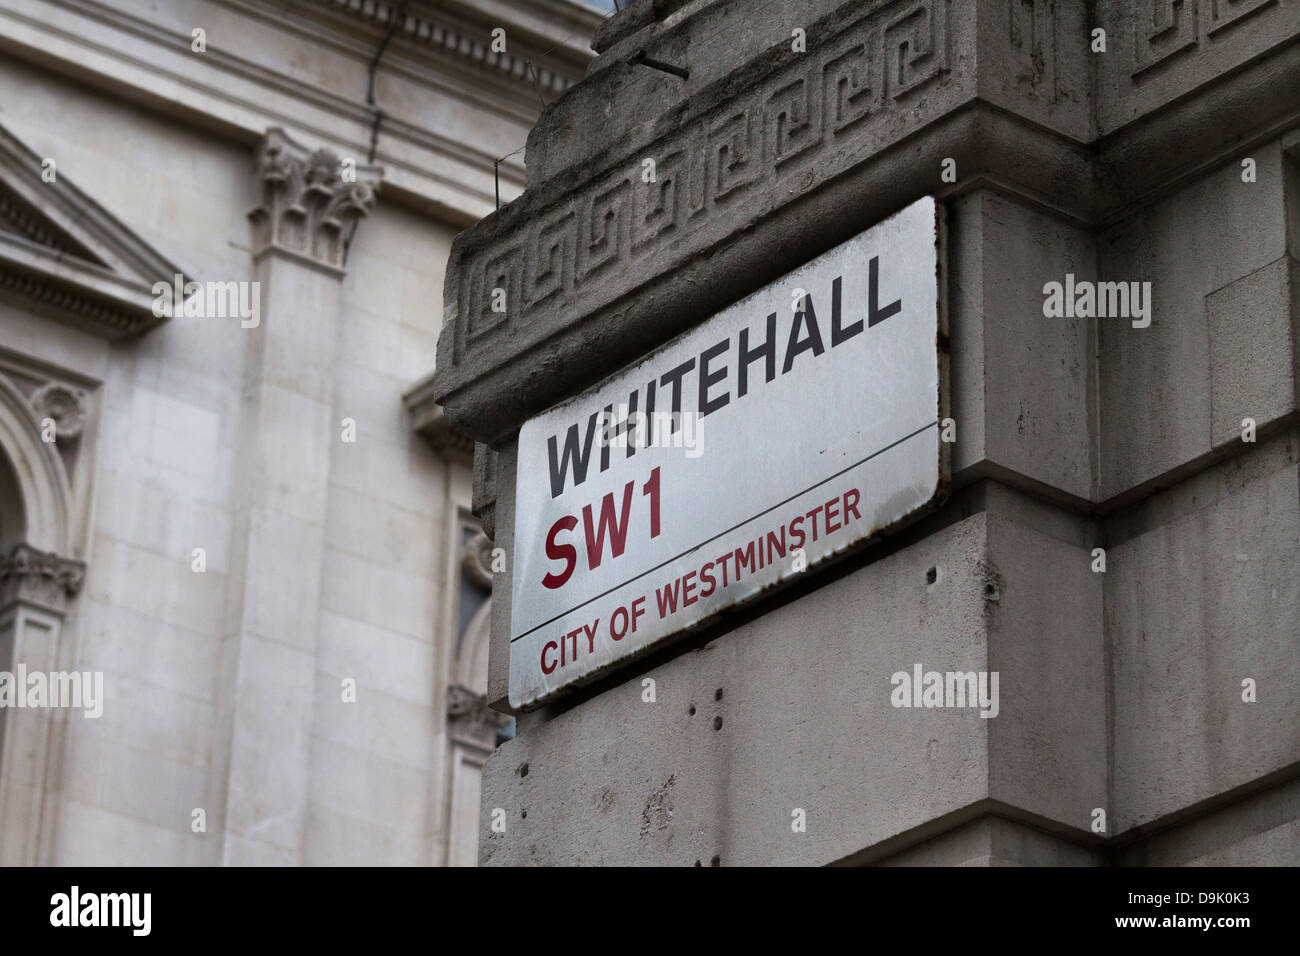 Whitehall street sign high on wall near Downing Street, Westminster, London, UK Stock Photo